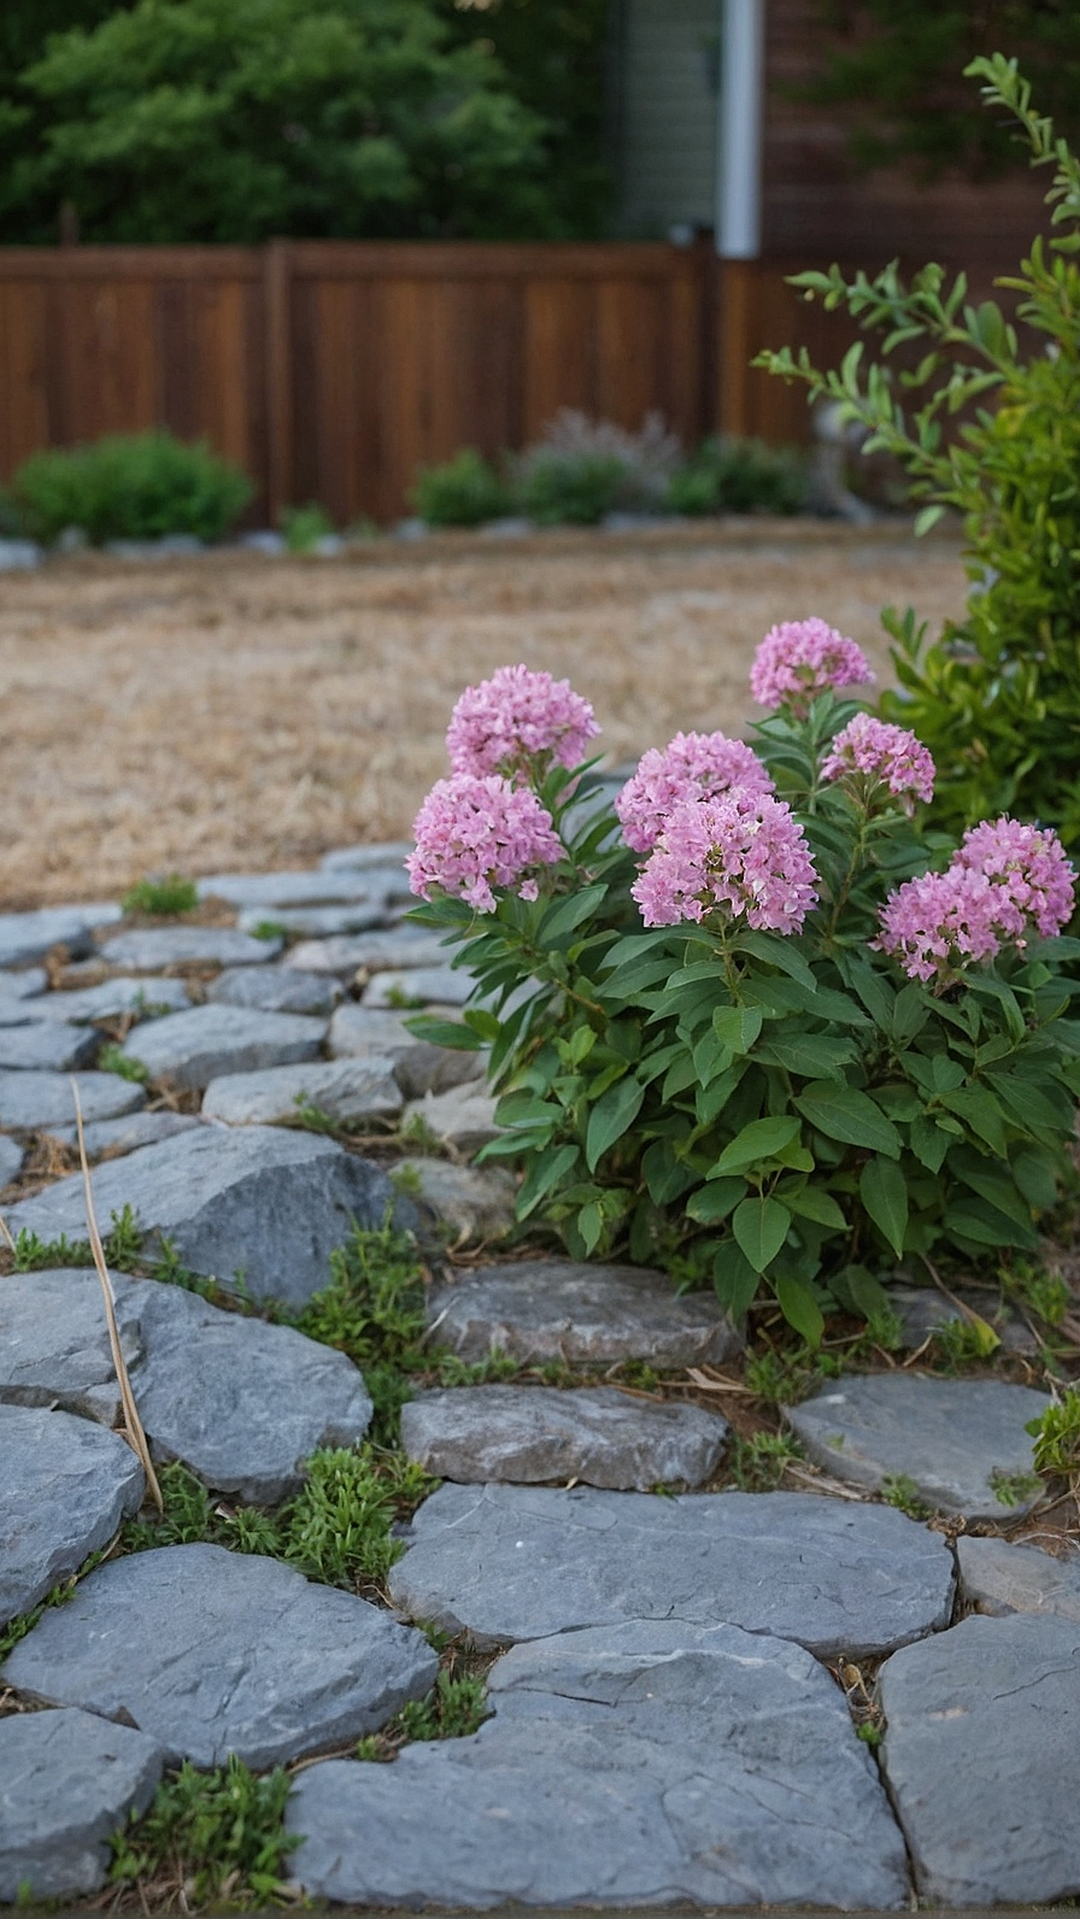 Native Flair: Indigenous Bushes for Eco-Friendly Landscaping